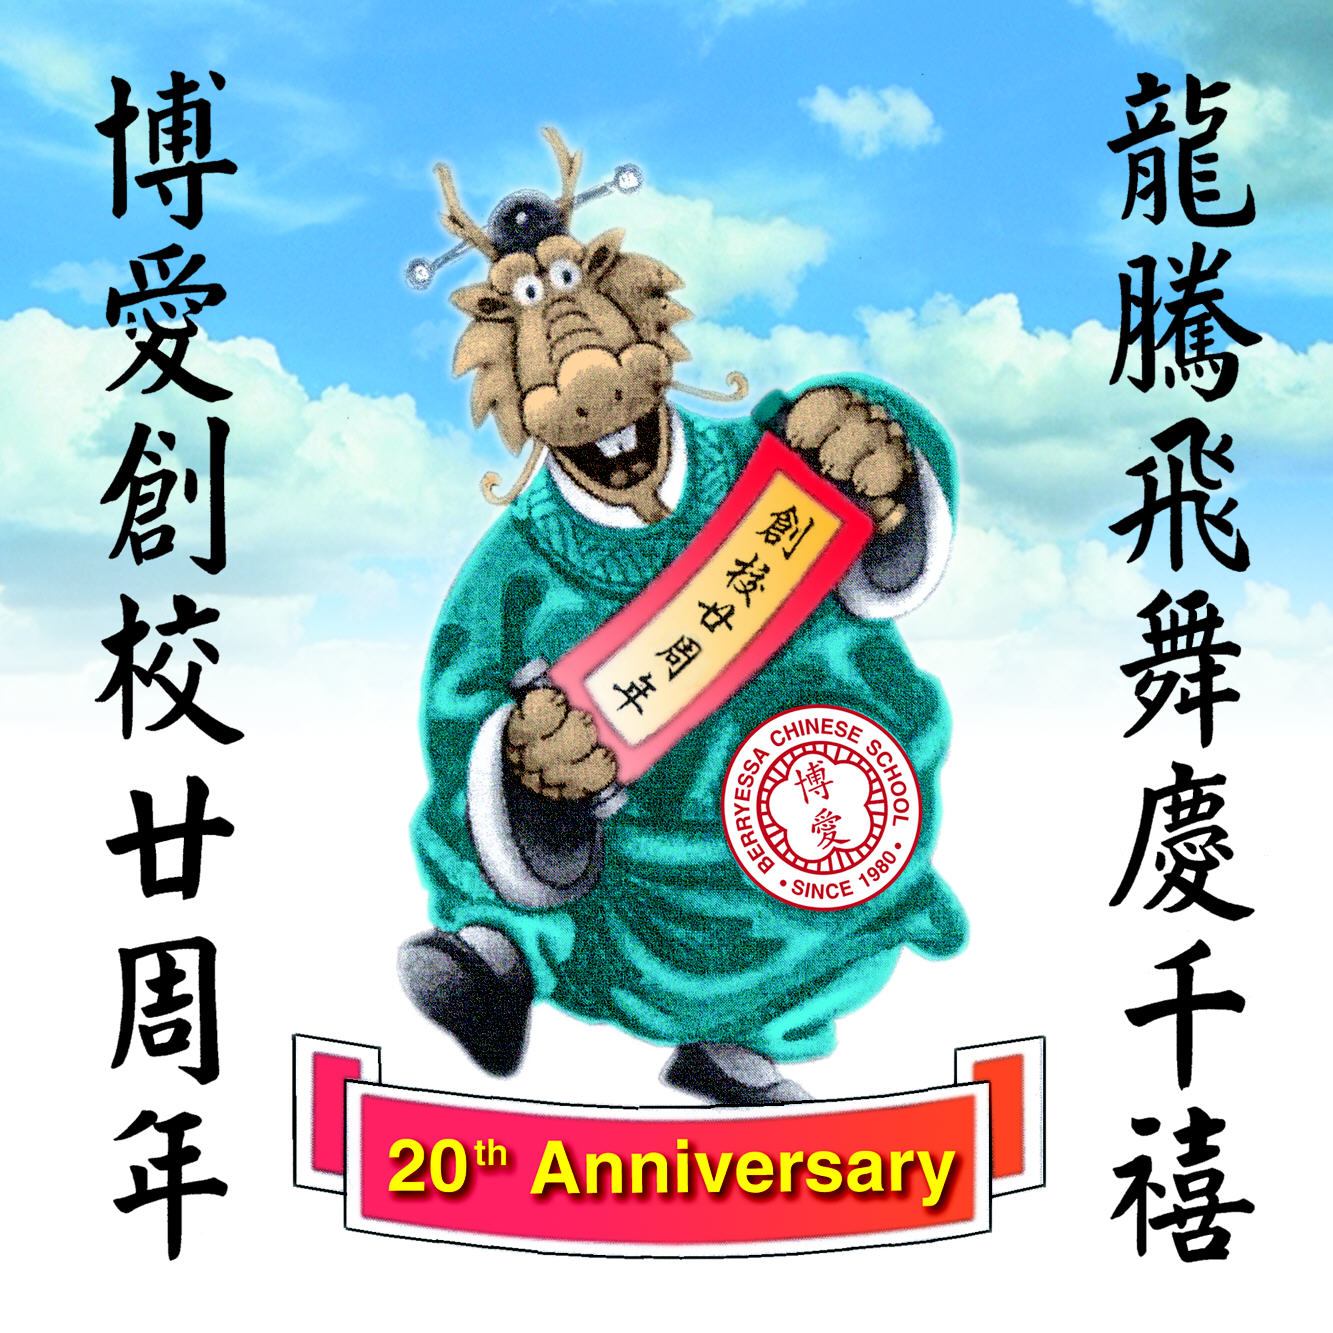 20th Anniv in the Year of the Dragon